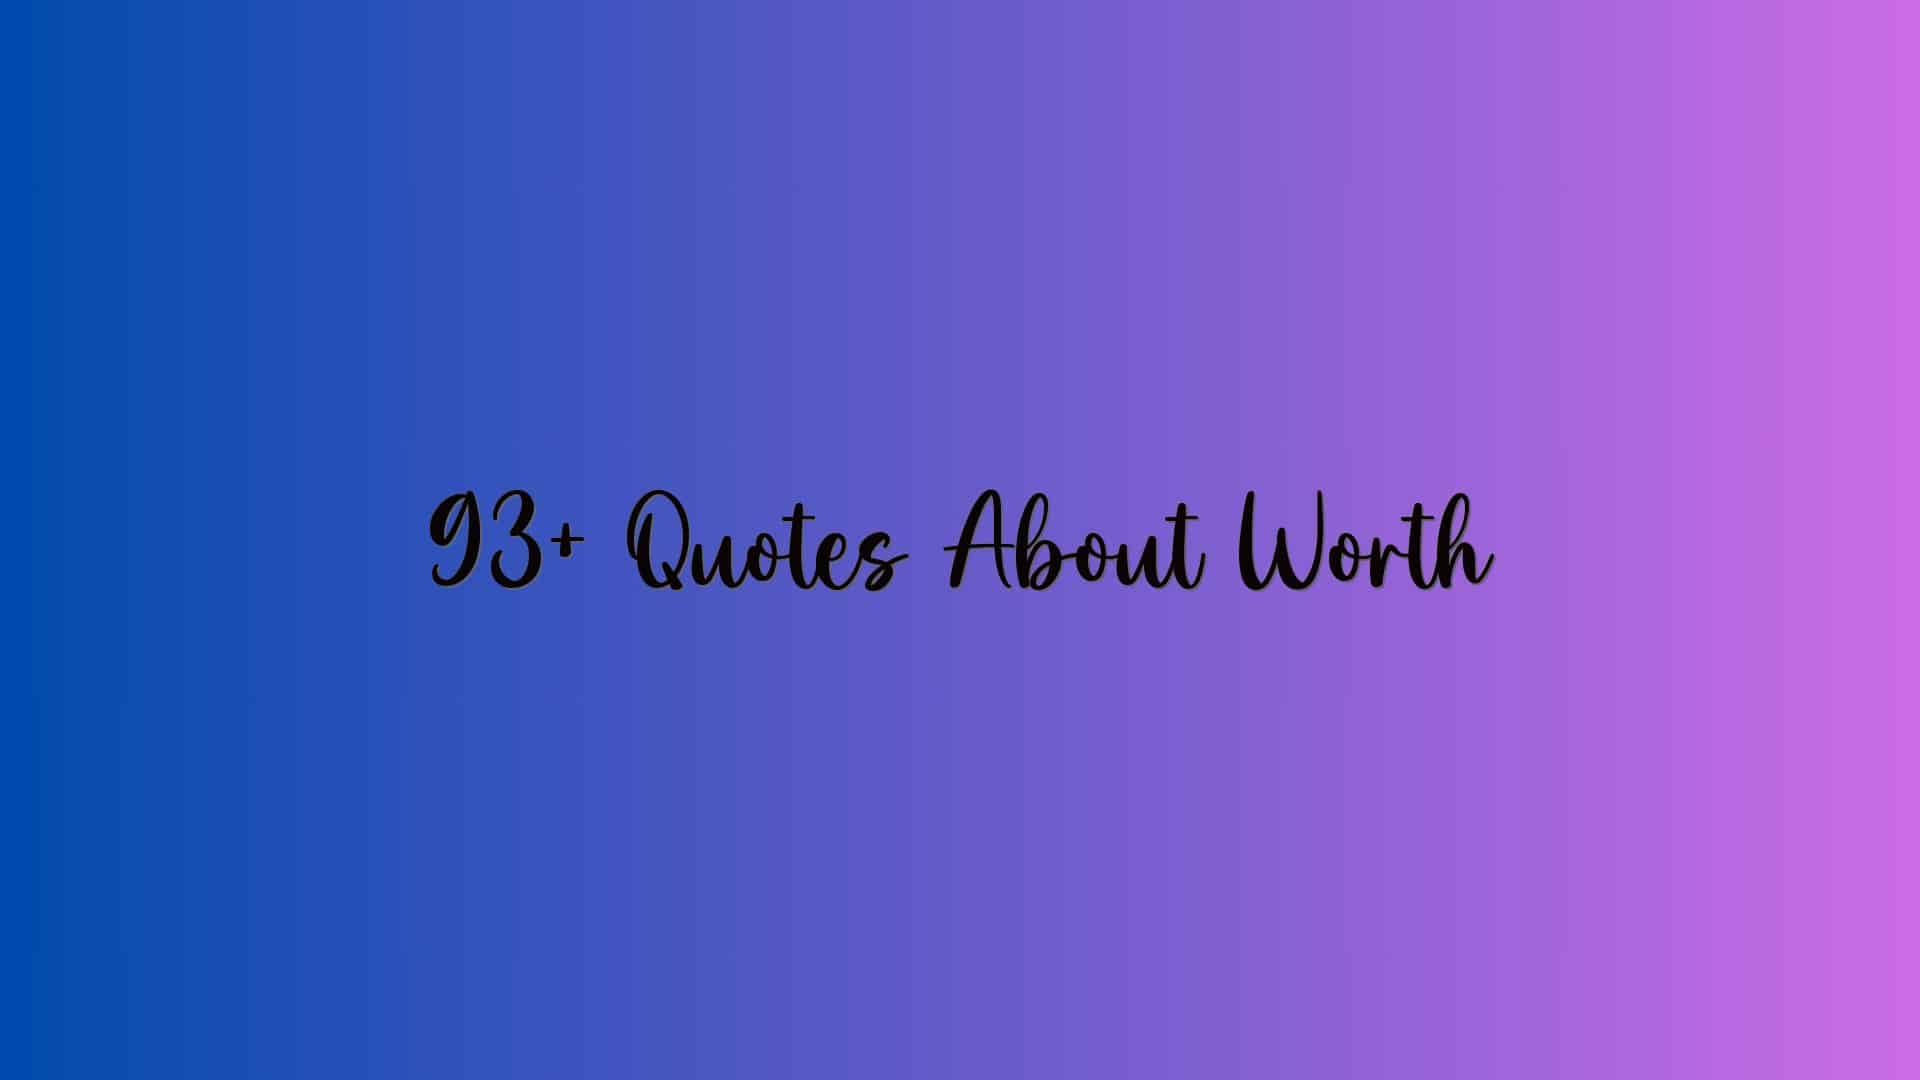 93+ Quotes About Worth